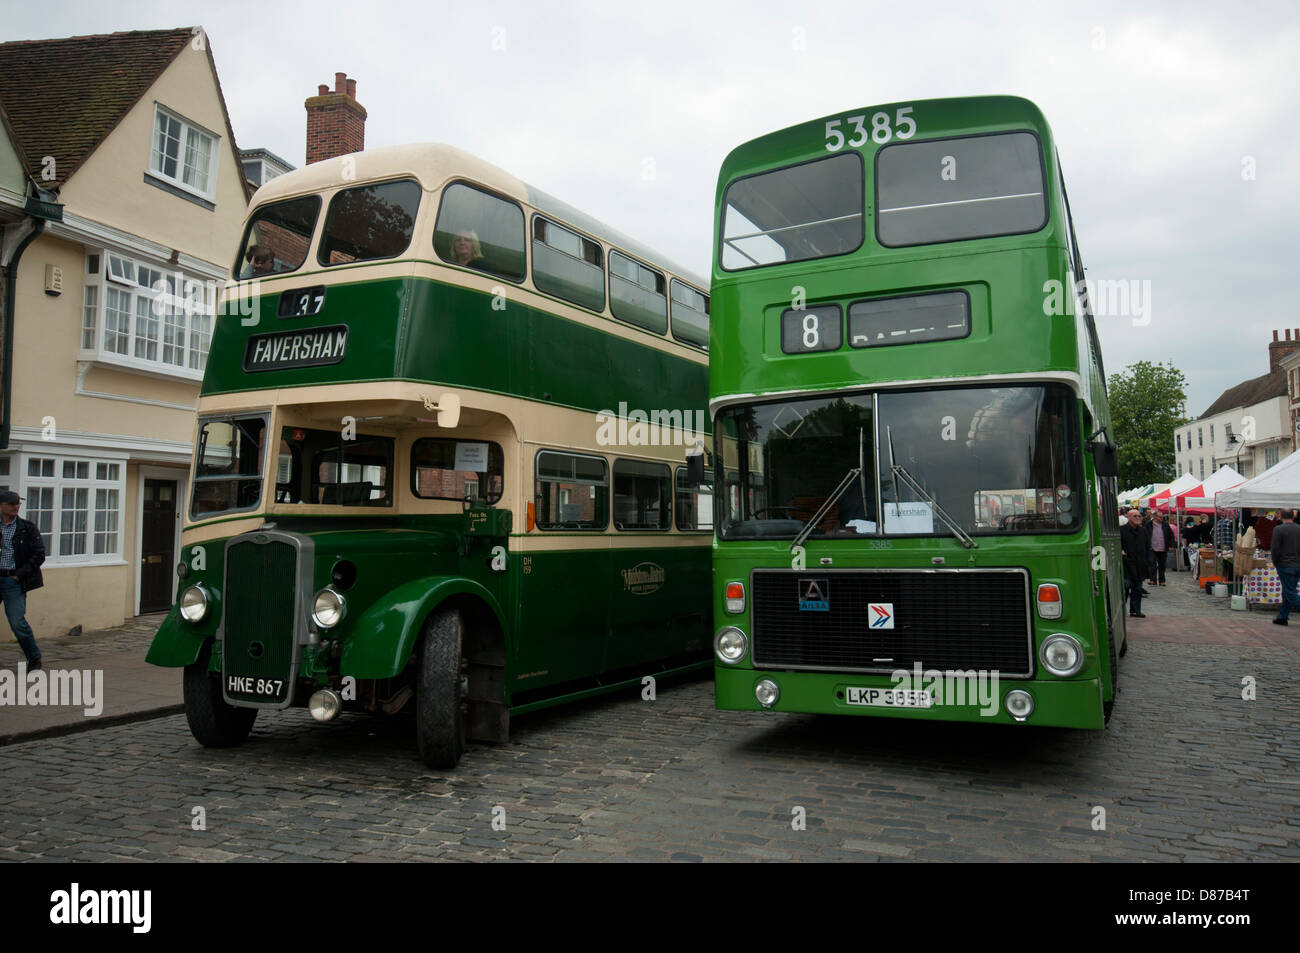 Transport motor show at faversham in kent buses weekend two double decker buses a route master DH159 and a leyland fleetliner Stock Photo